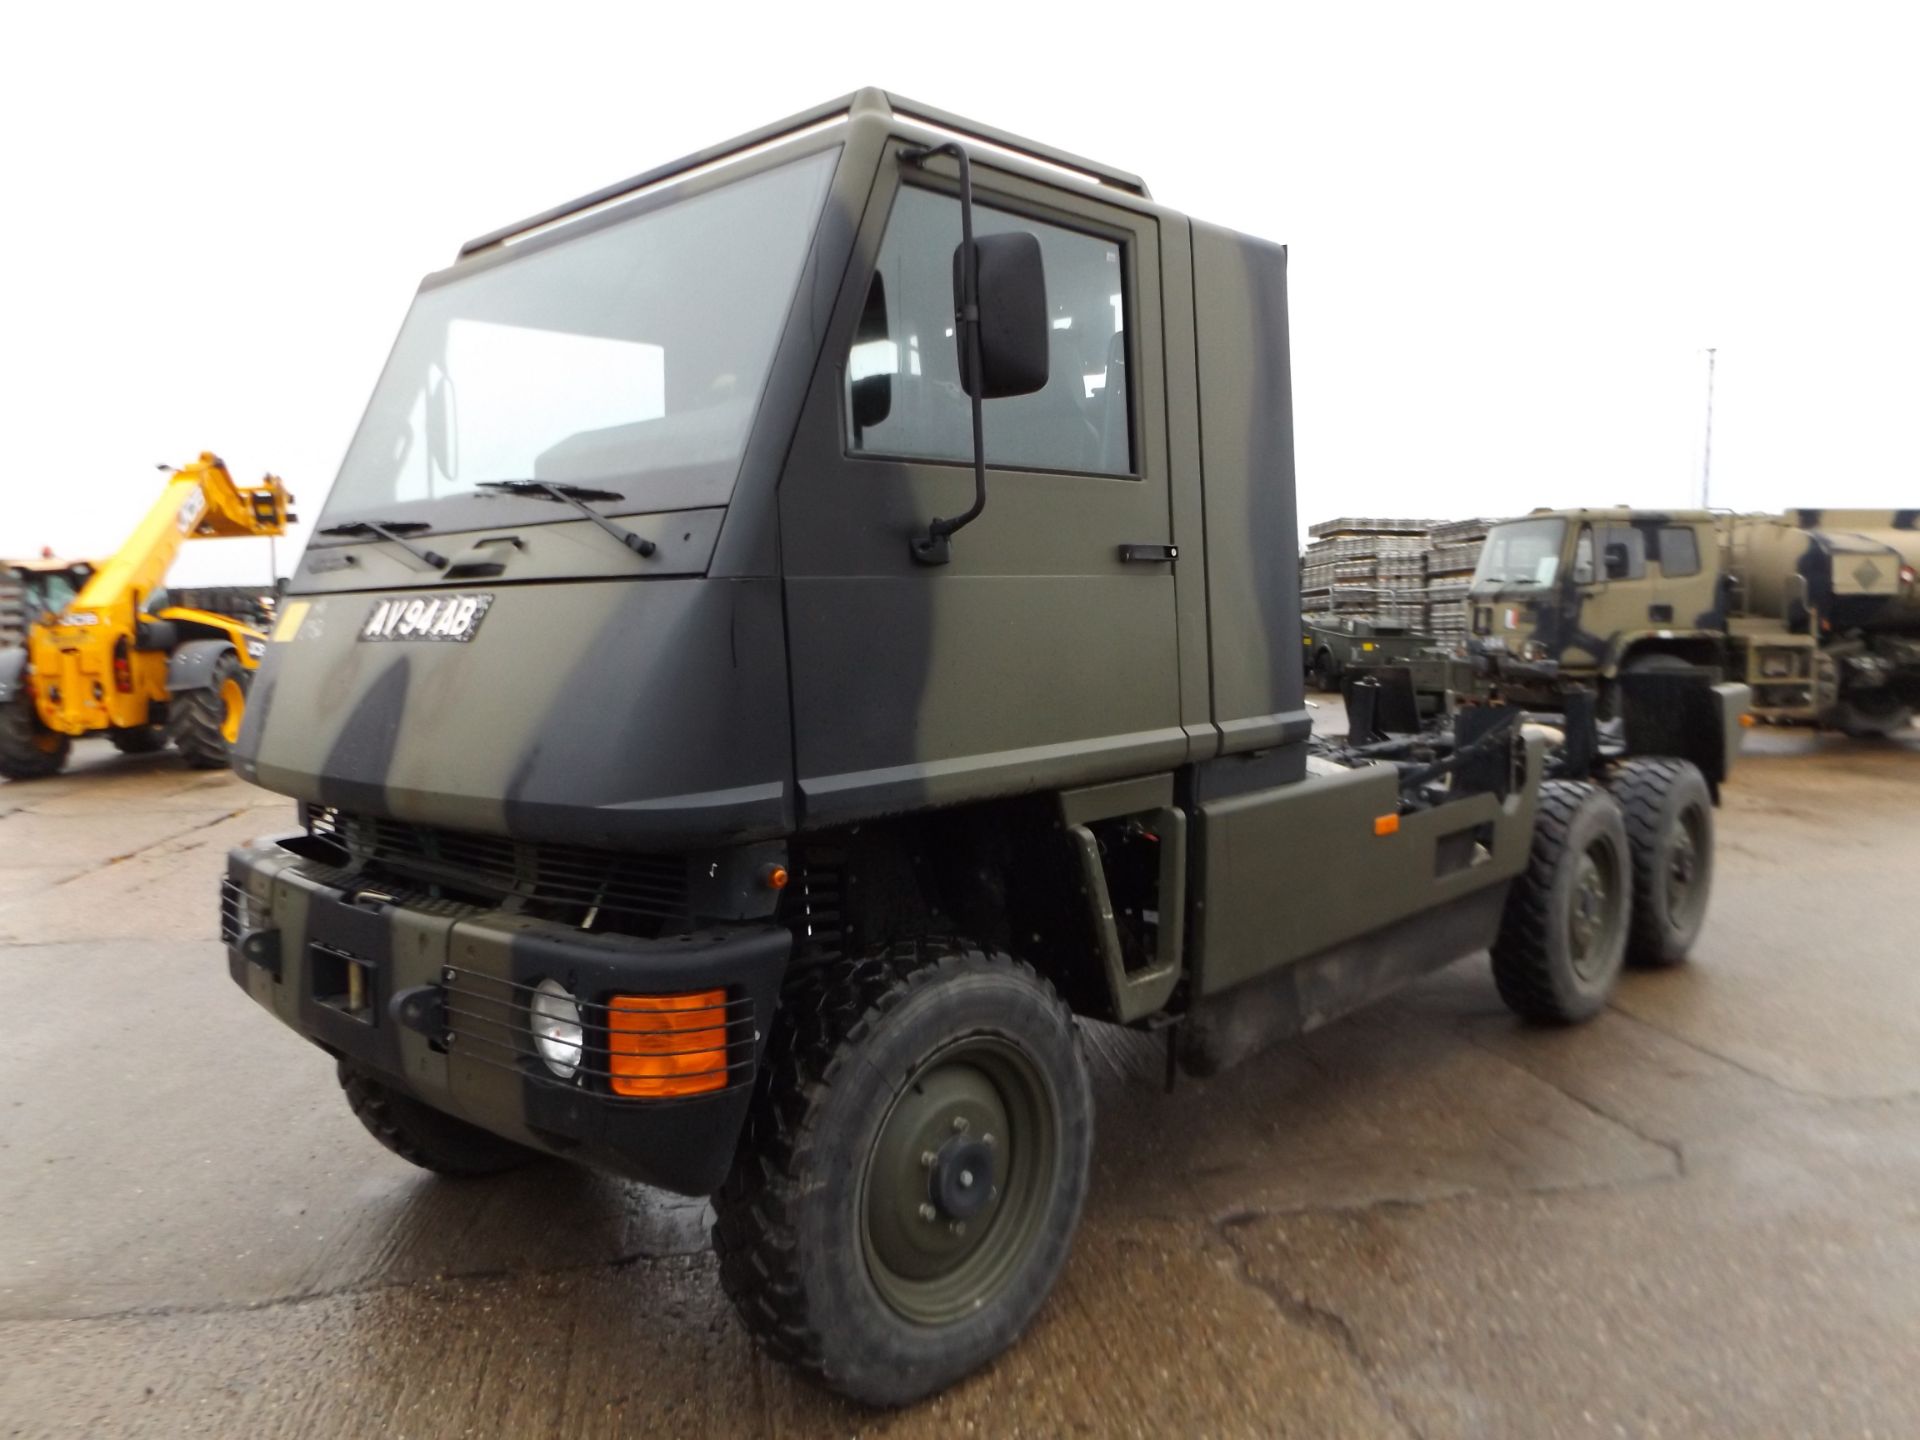 Ex Reserve Left Hand Drive Mowag Bucher Duro II 6x6 High-Mobility Tactical Vehicle - Image 3 of 12